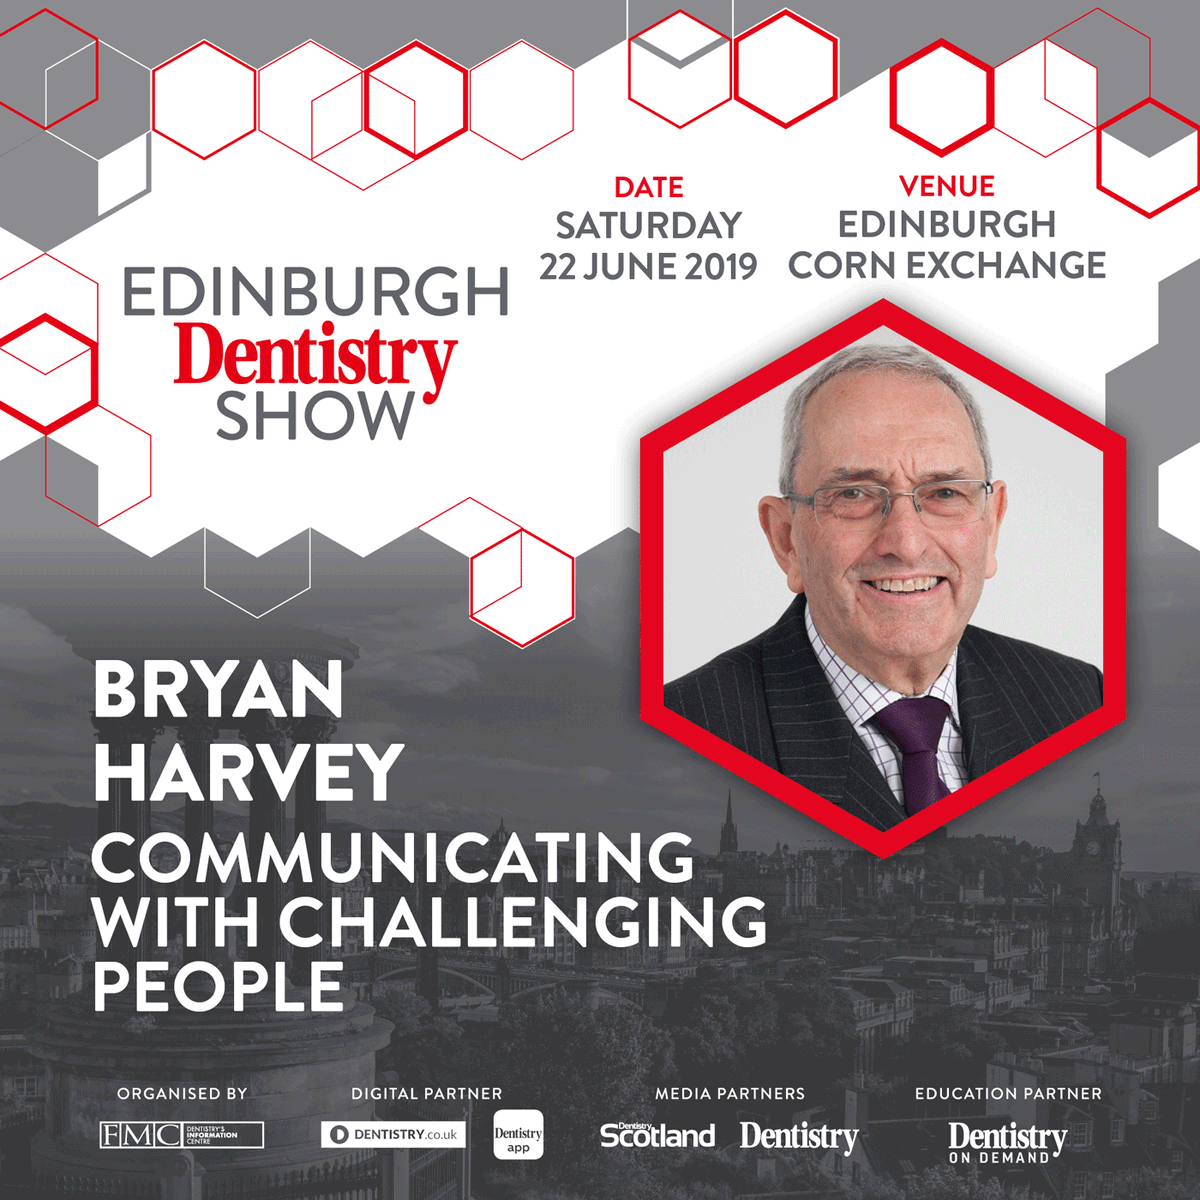 Bryan Harvey will provide insight on communicating with challenging people at the unmissable Edinburgh Dentistry Show on 22 June! Get your free ticket now! 
👉 bit.ly/2VGH4ak 👈  

#edinburghdentistryshow #dentist #dentistry #digitaldentistry #dentistedinburgh